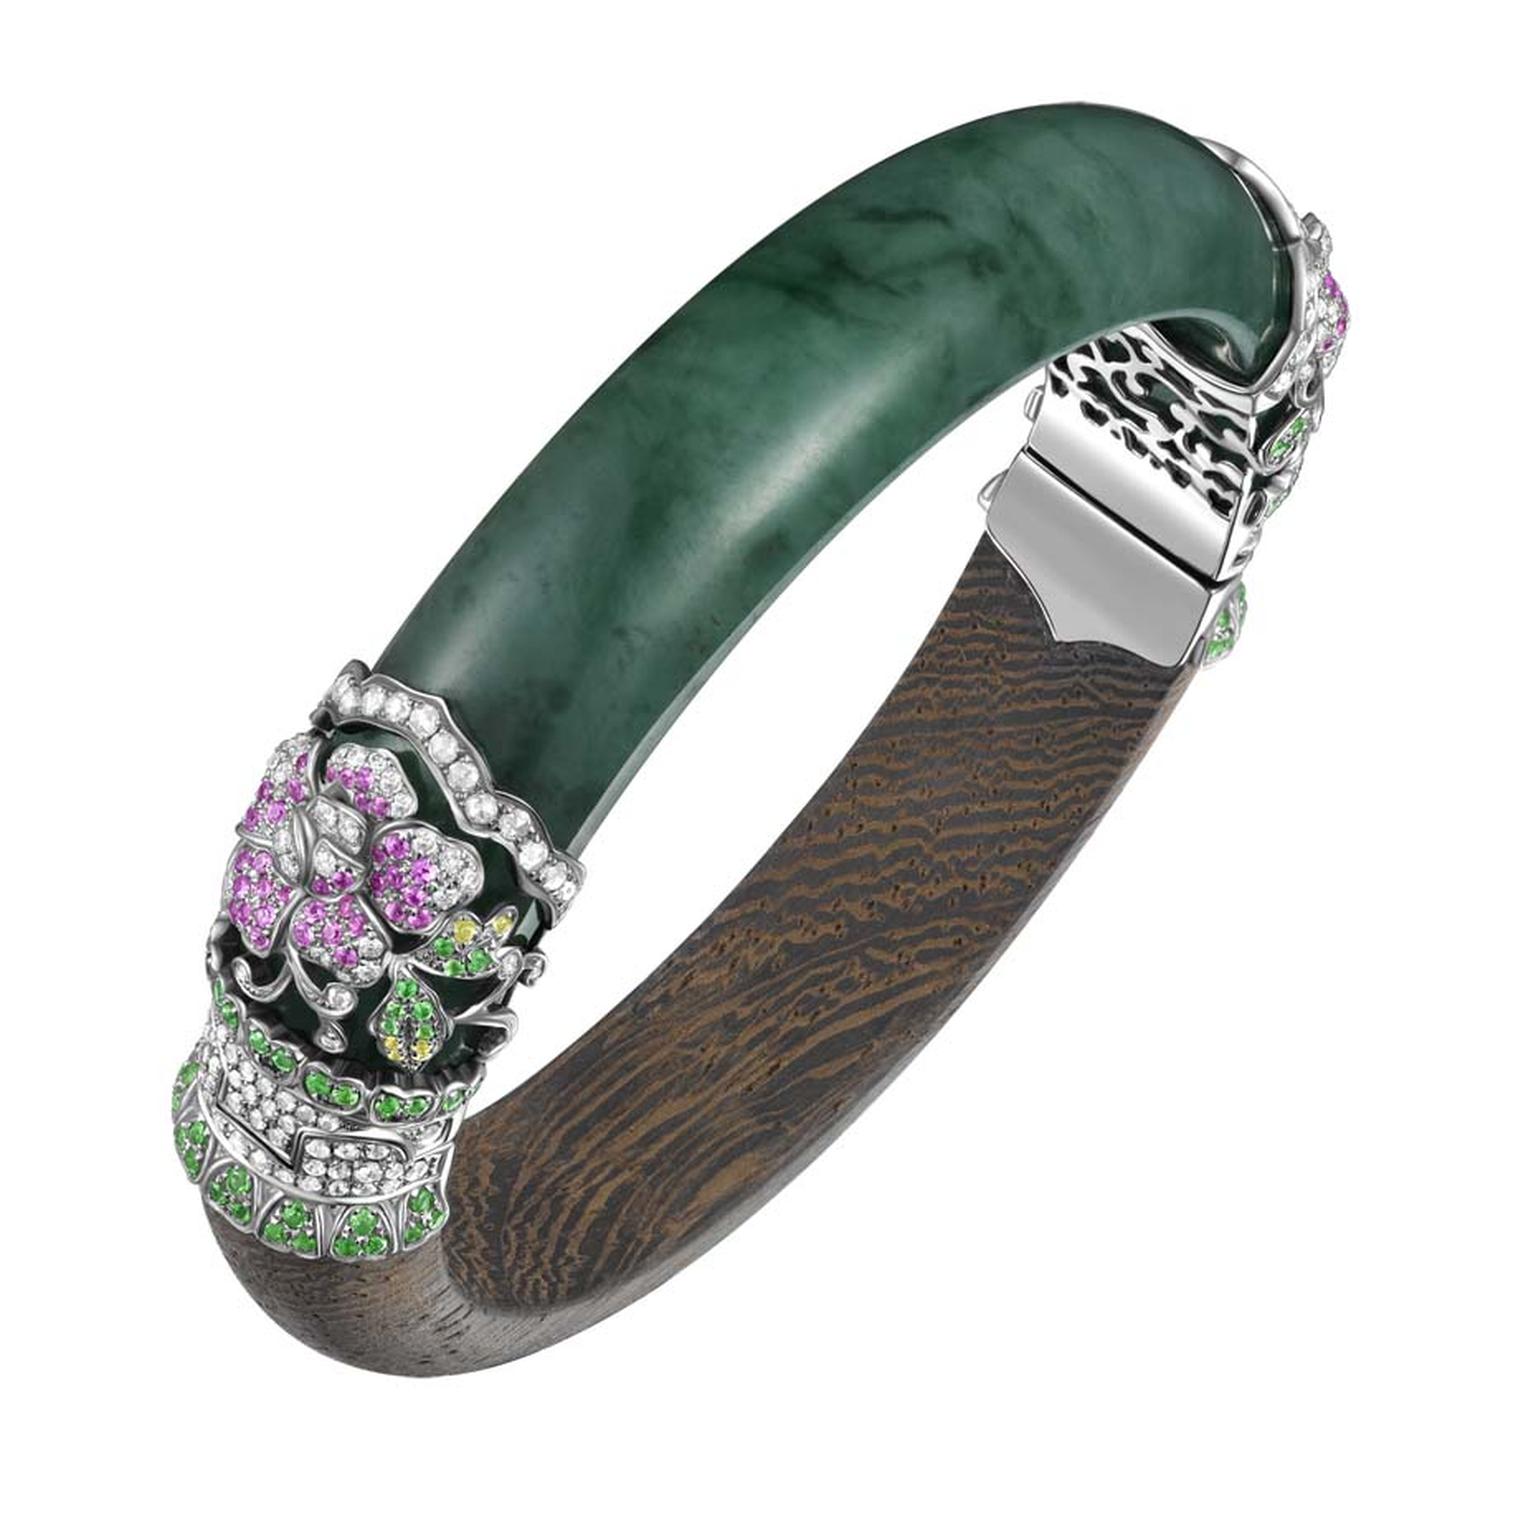 YEWN's Imperial jadeite and wood bangle in blackened white gold with jadeite, diamonds, pink sapphires and tsavorites, from the Grace Collection.